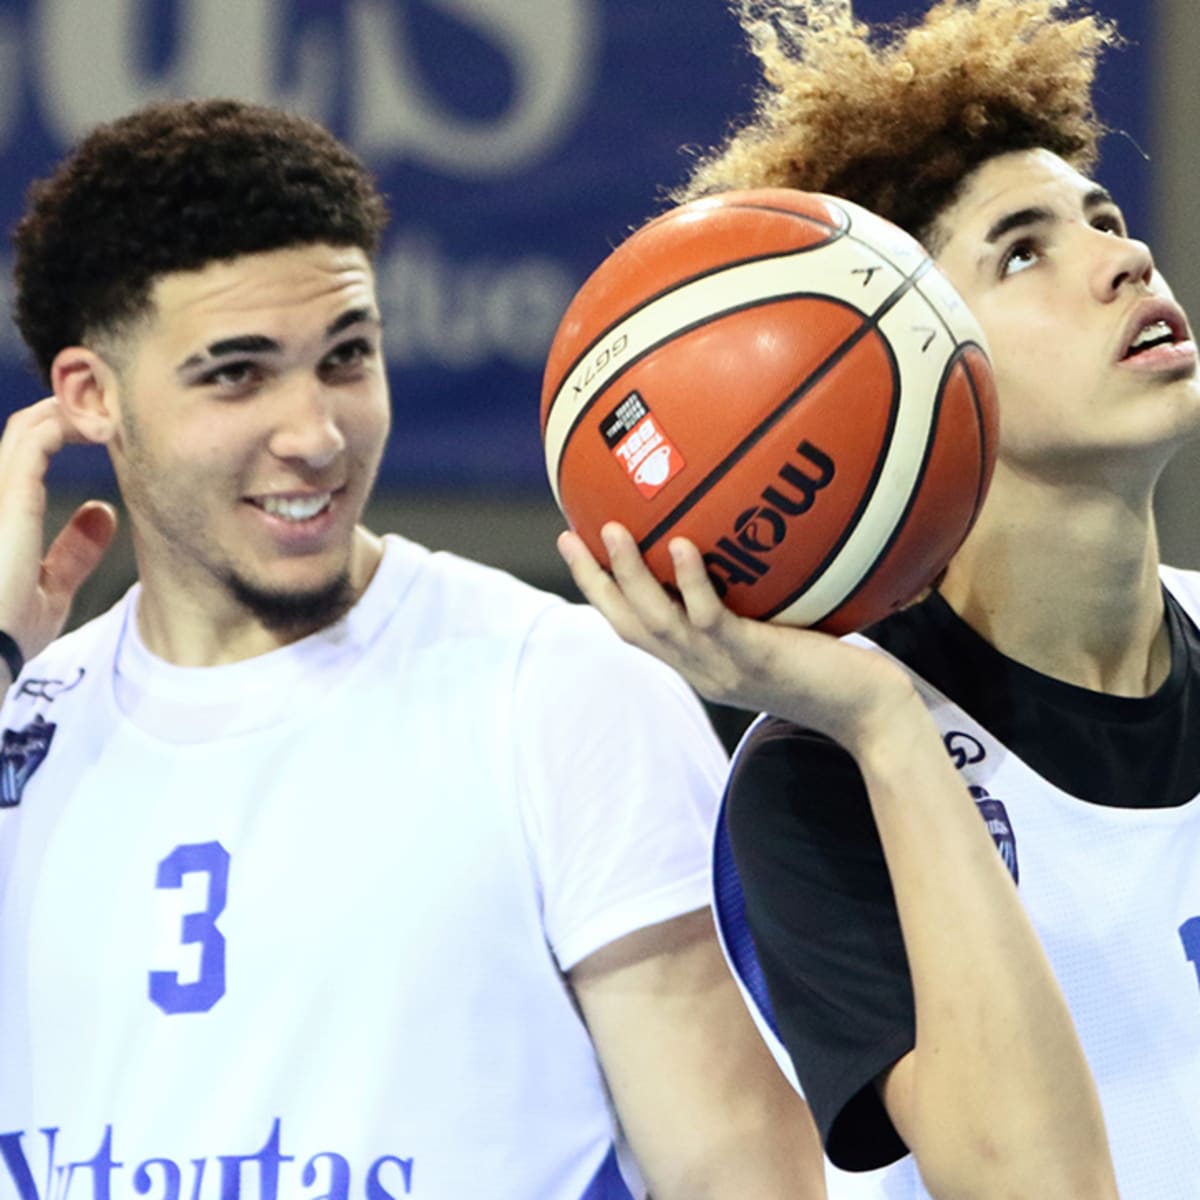 Ball Brothers - LaMelo Ball, LiAngelo Ball, and Lonzo Ball